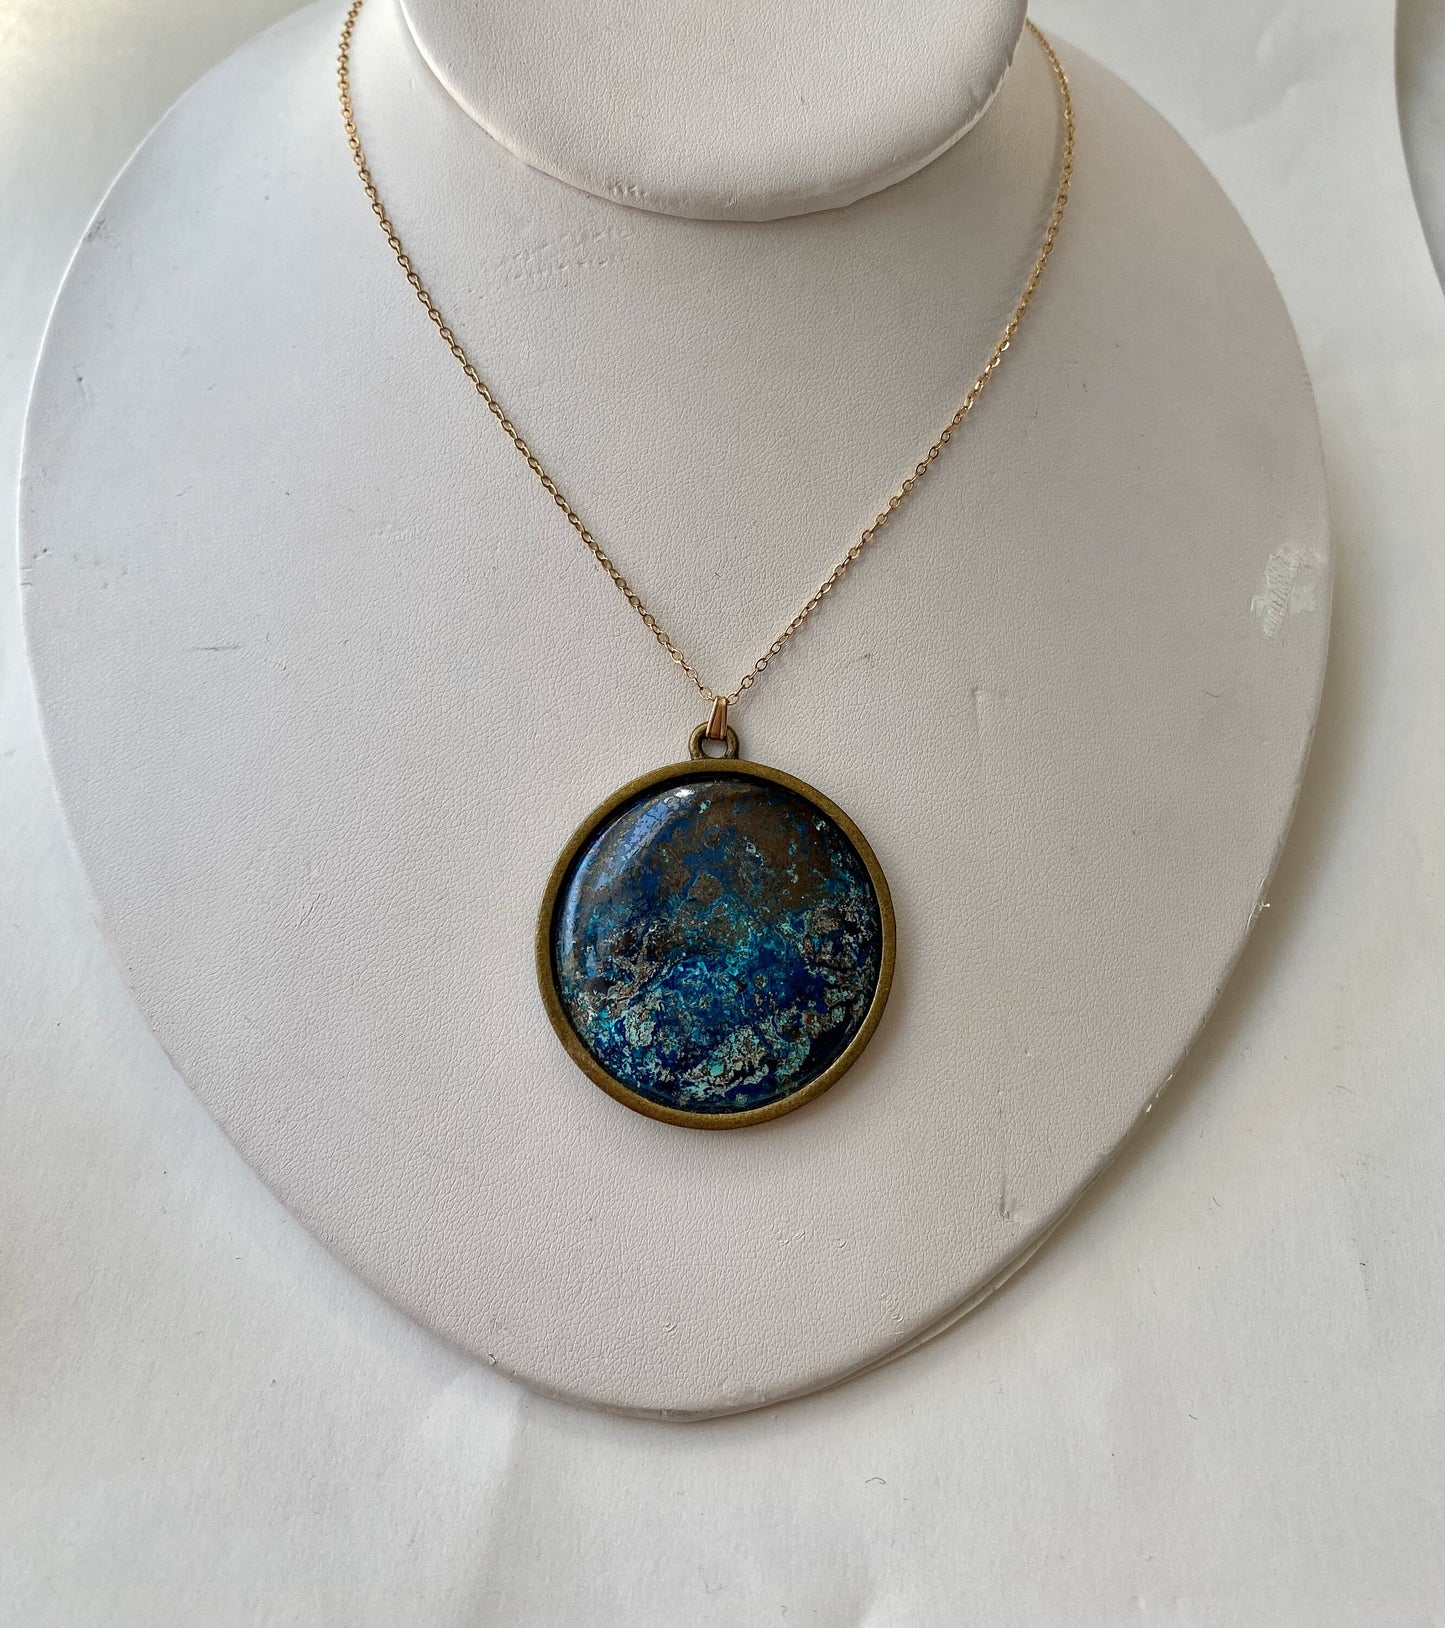 Gorgeous Chrysocolla gemstone pendant strung on beautiful gold filled chain. Gift for women, birthday gift.